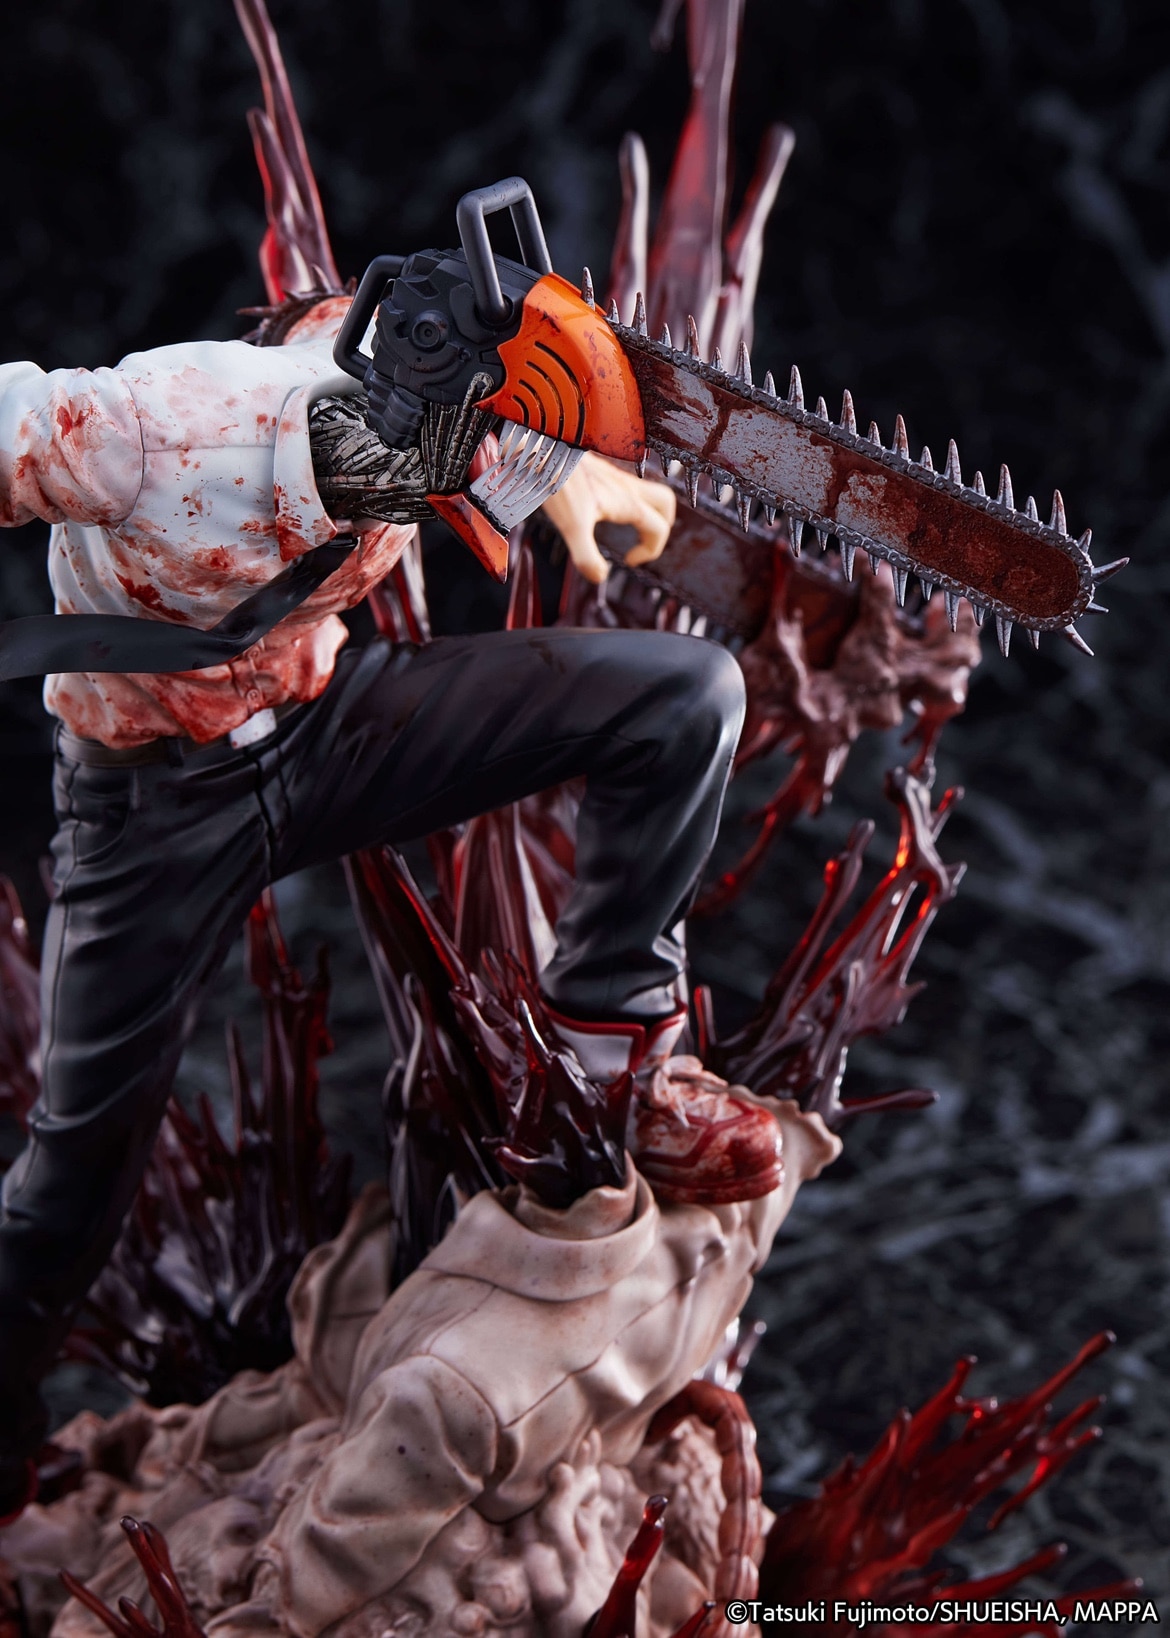 Chainsaw Man – Denji Devil Form-Themed Badass Action Figure (Box/No Box) Action & Toy Figures